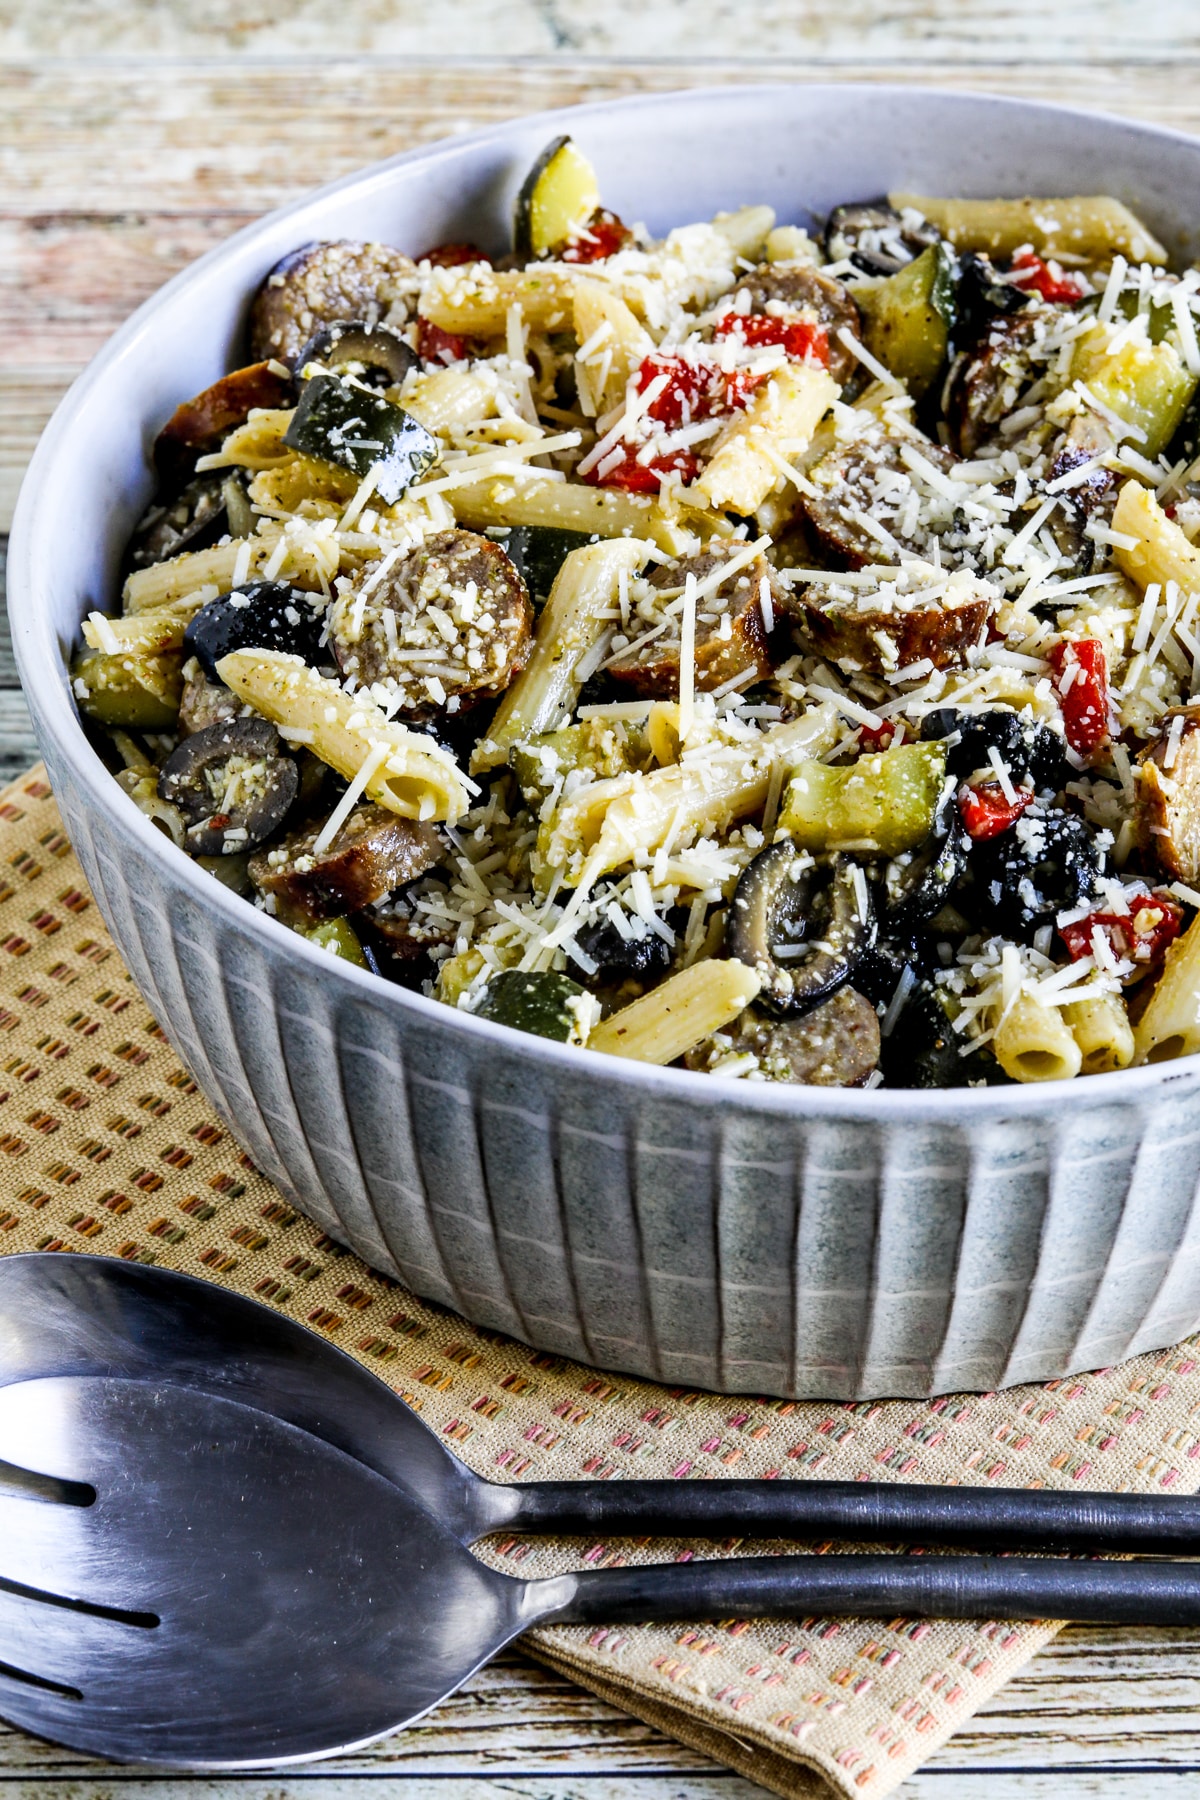 Pasta Salad with Sausage, Zucchini, Olives, and Peppers shown in serving bowl with forks and napkin